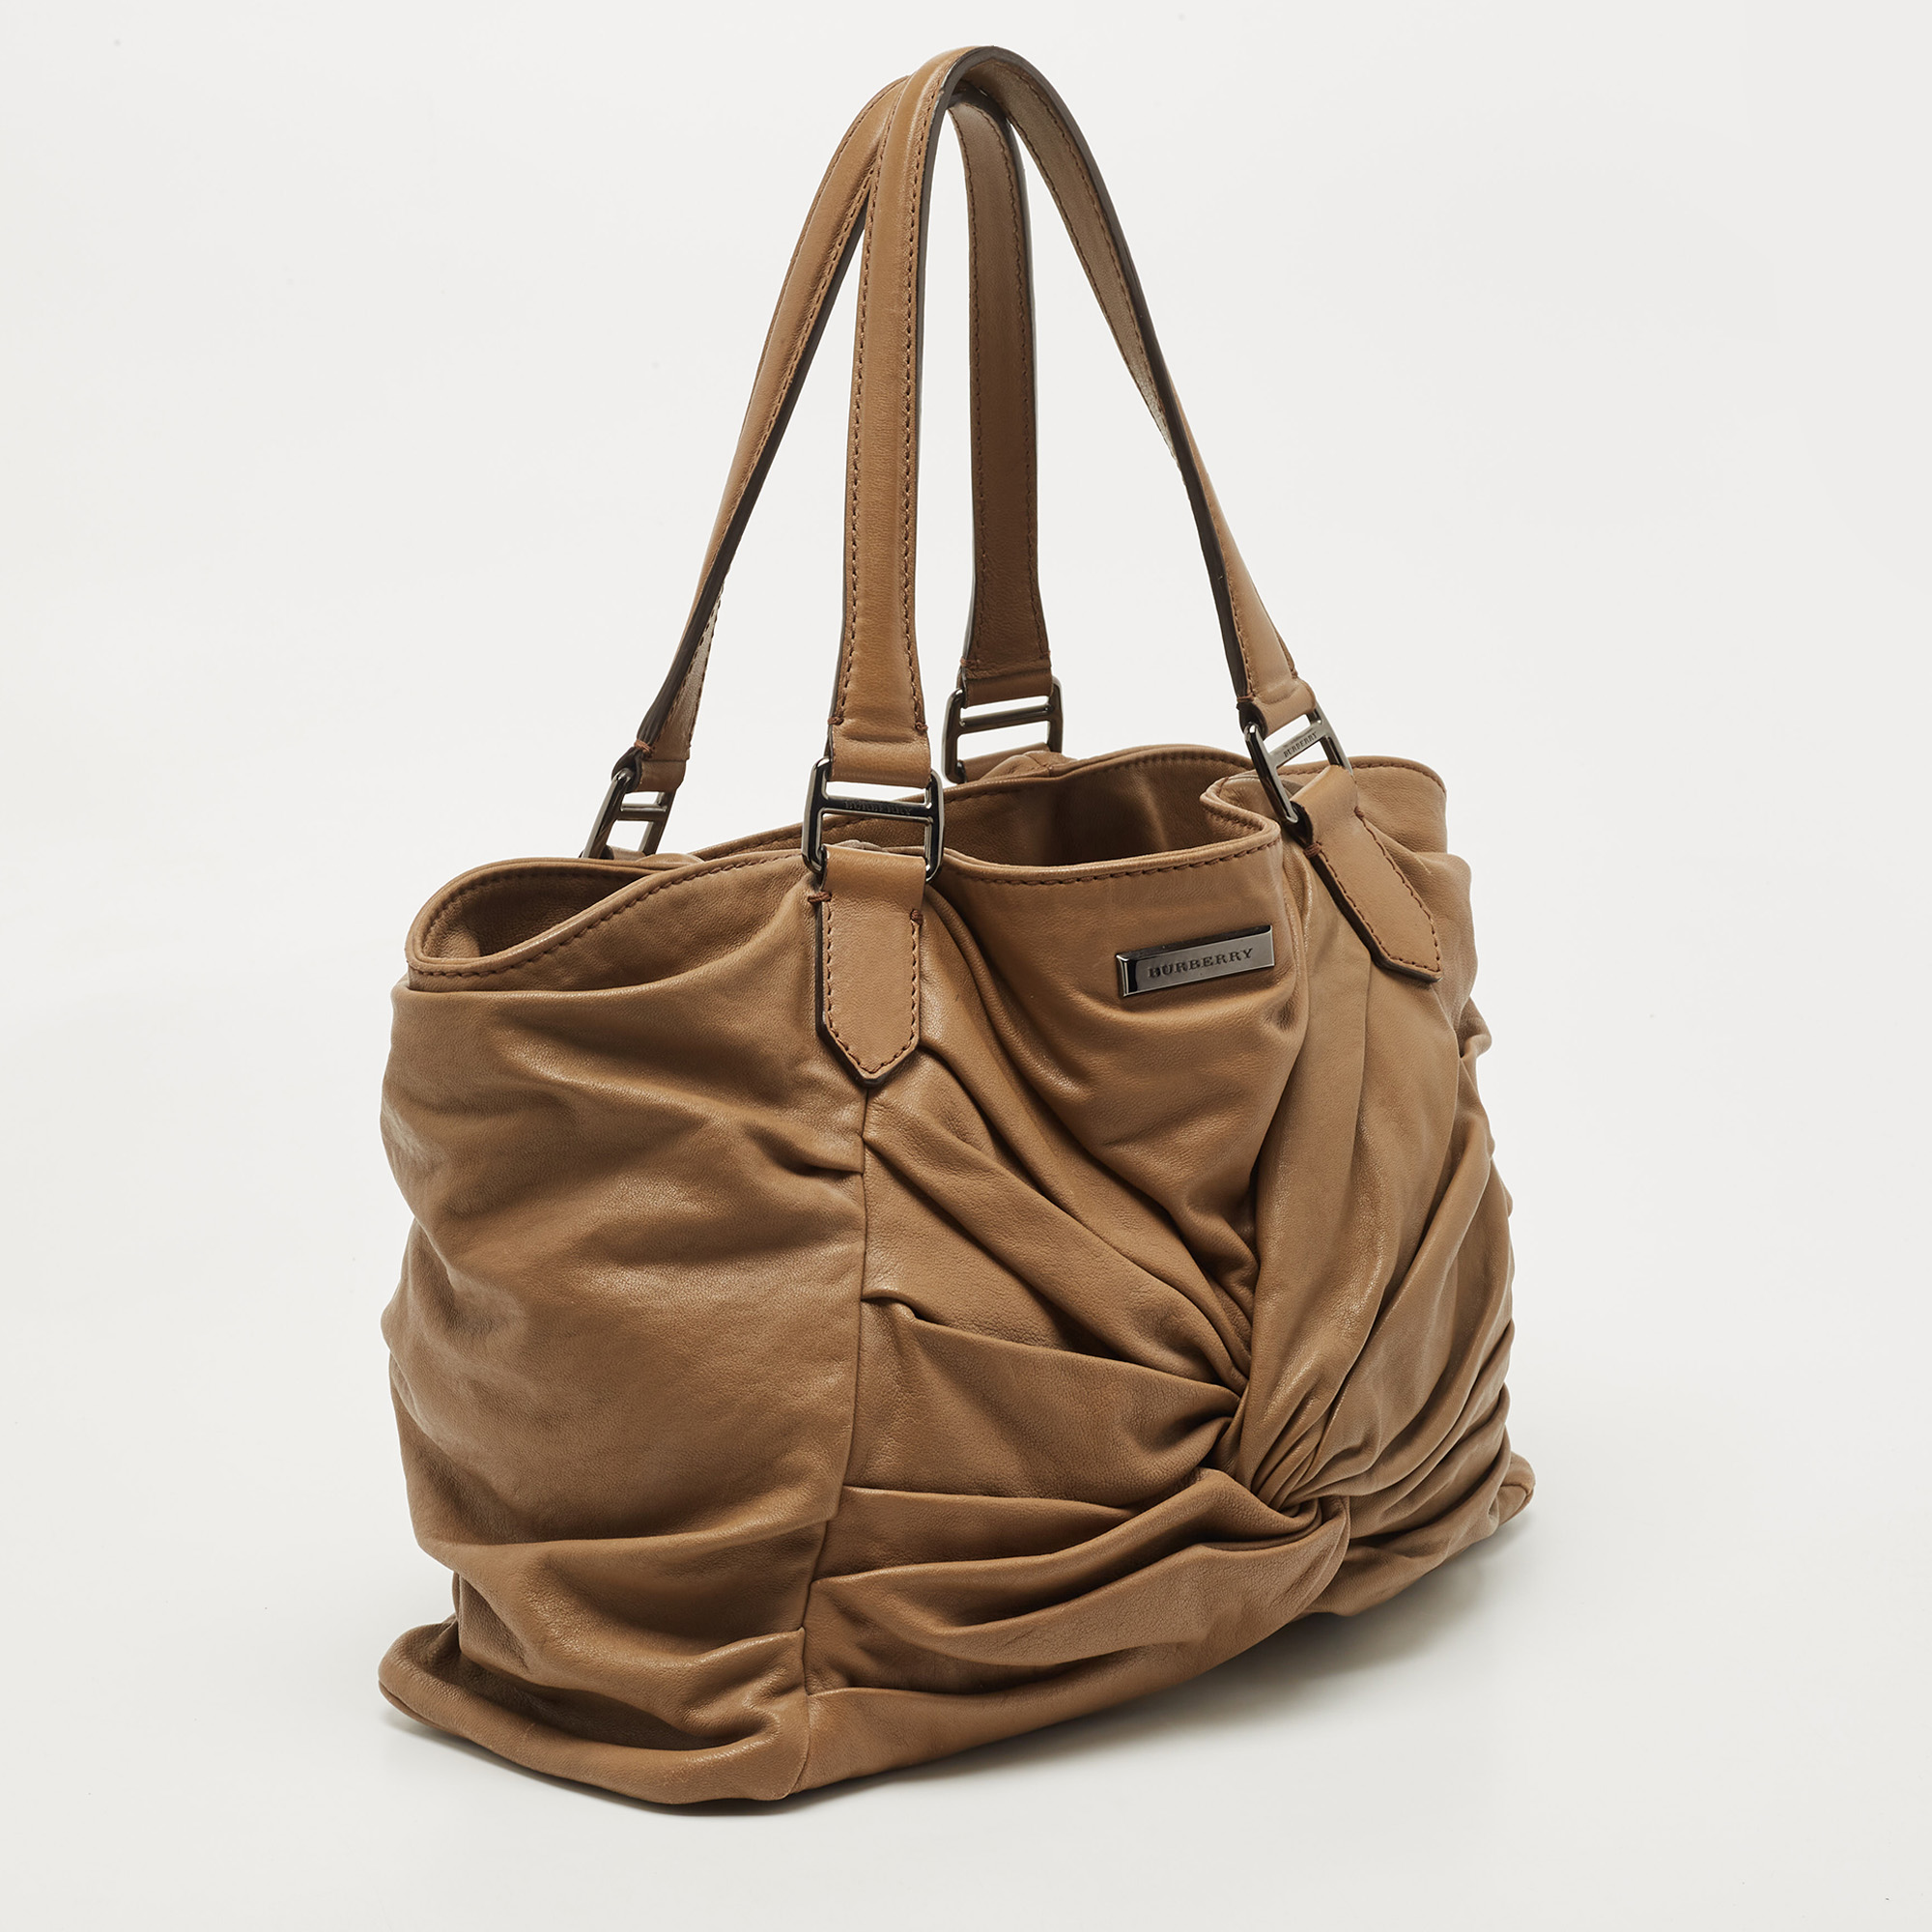 Burberry Tan Pleated Leather Tote